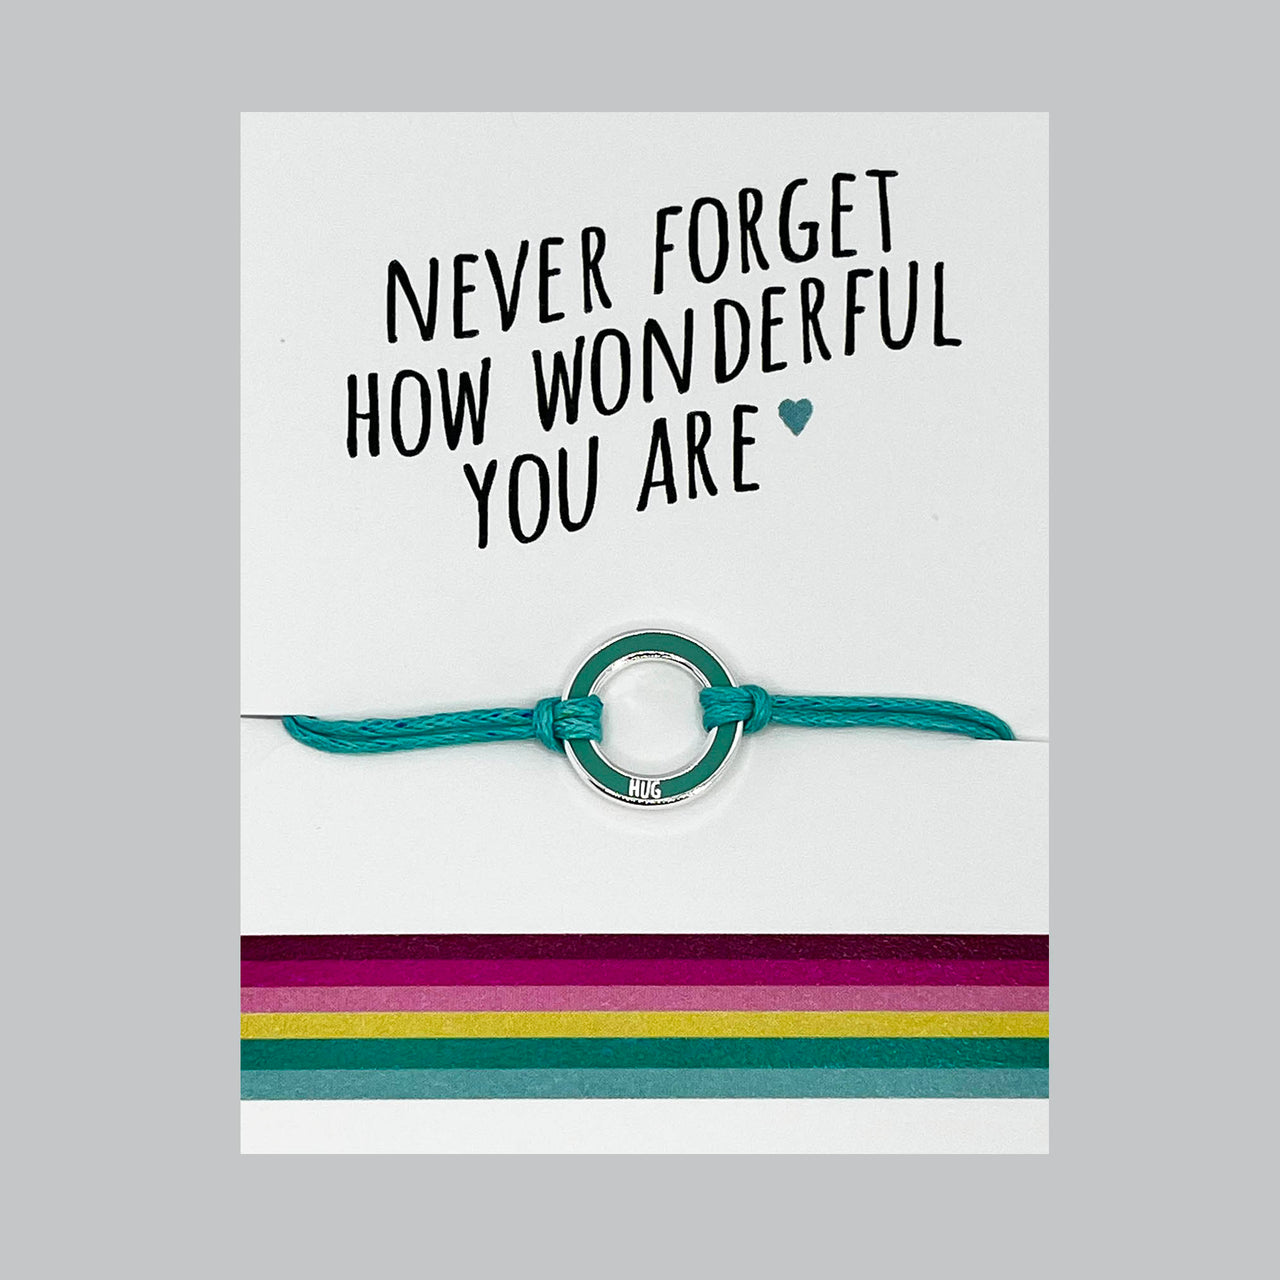 Never forget how wonderful you are